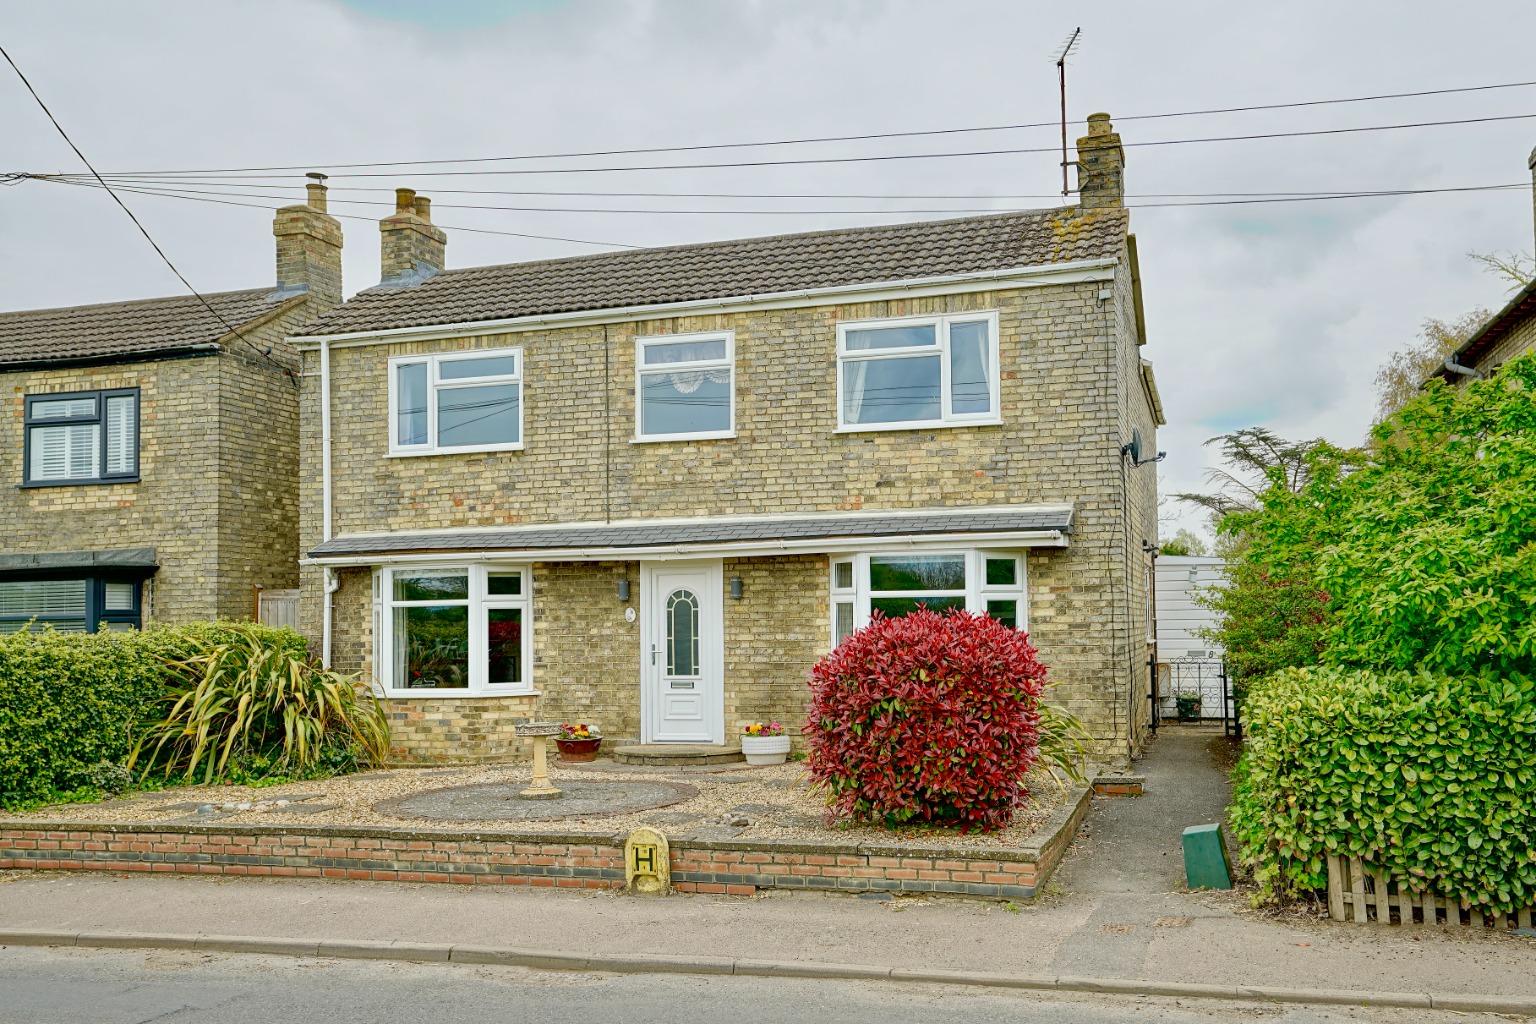 3 bed detached house for sale in Colne Road, Huntingdon - Property Image 1